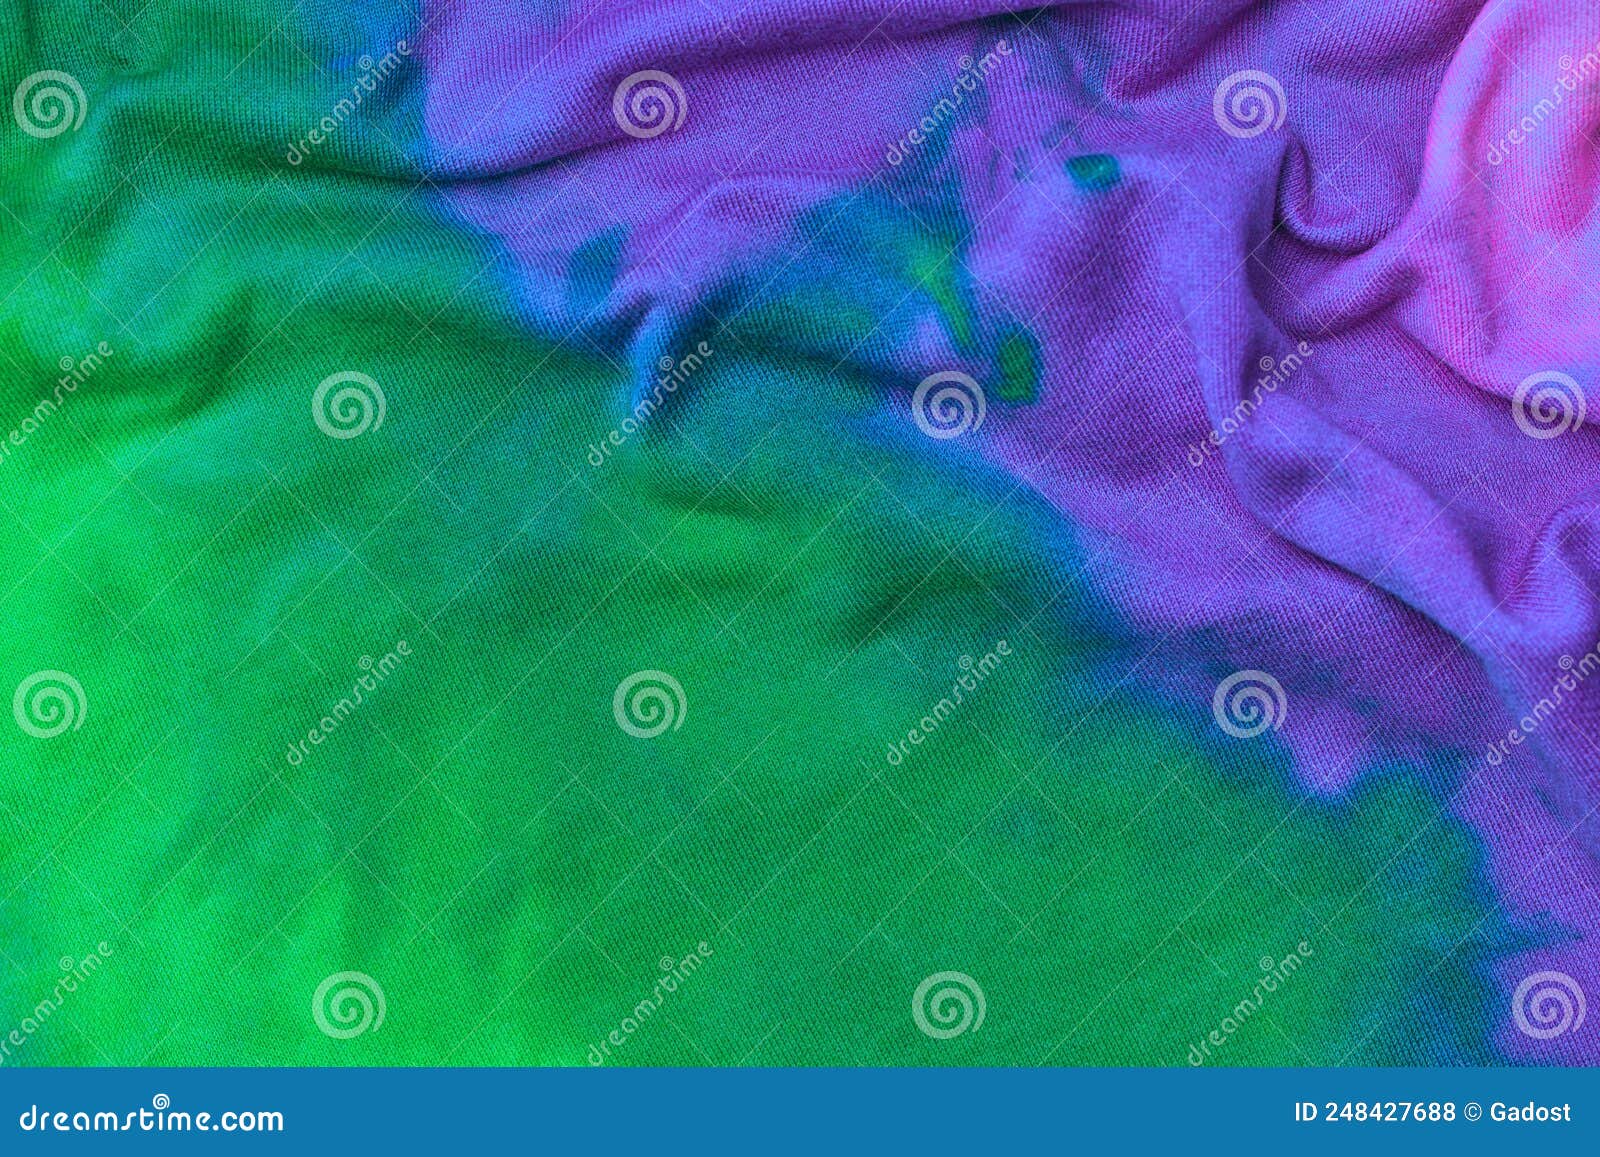 abstract tie dye multicolor fabric cloth purple pattern texture